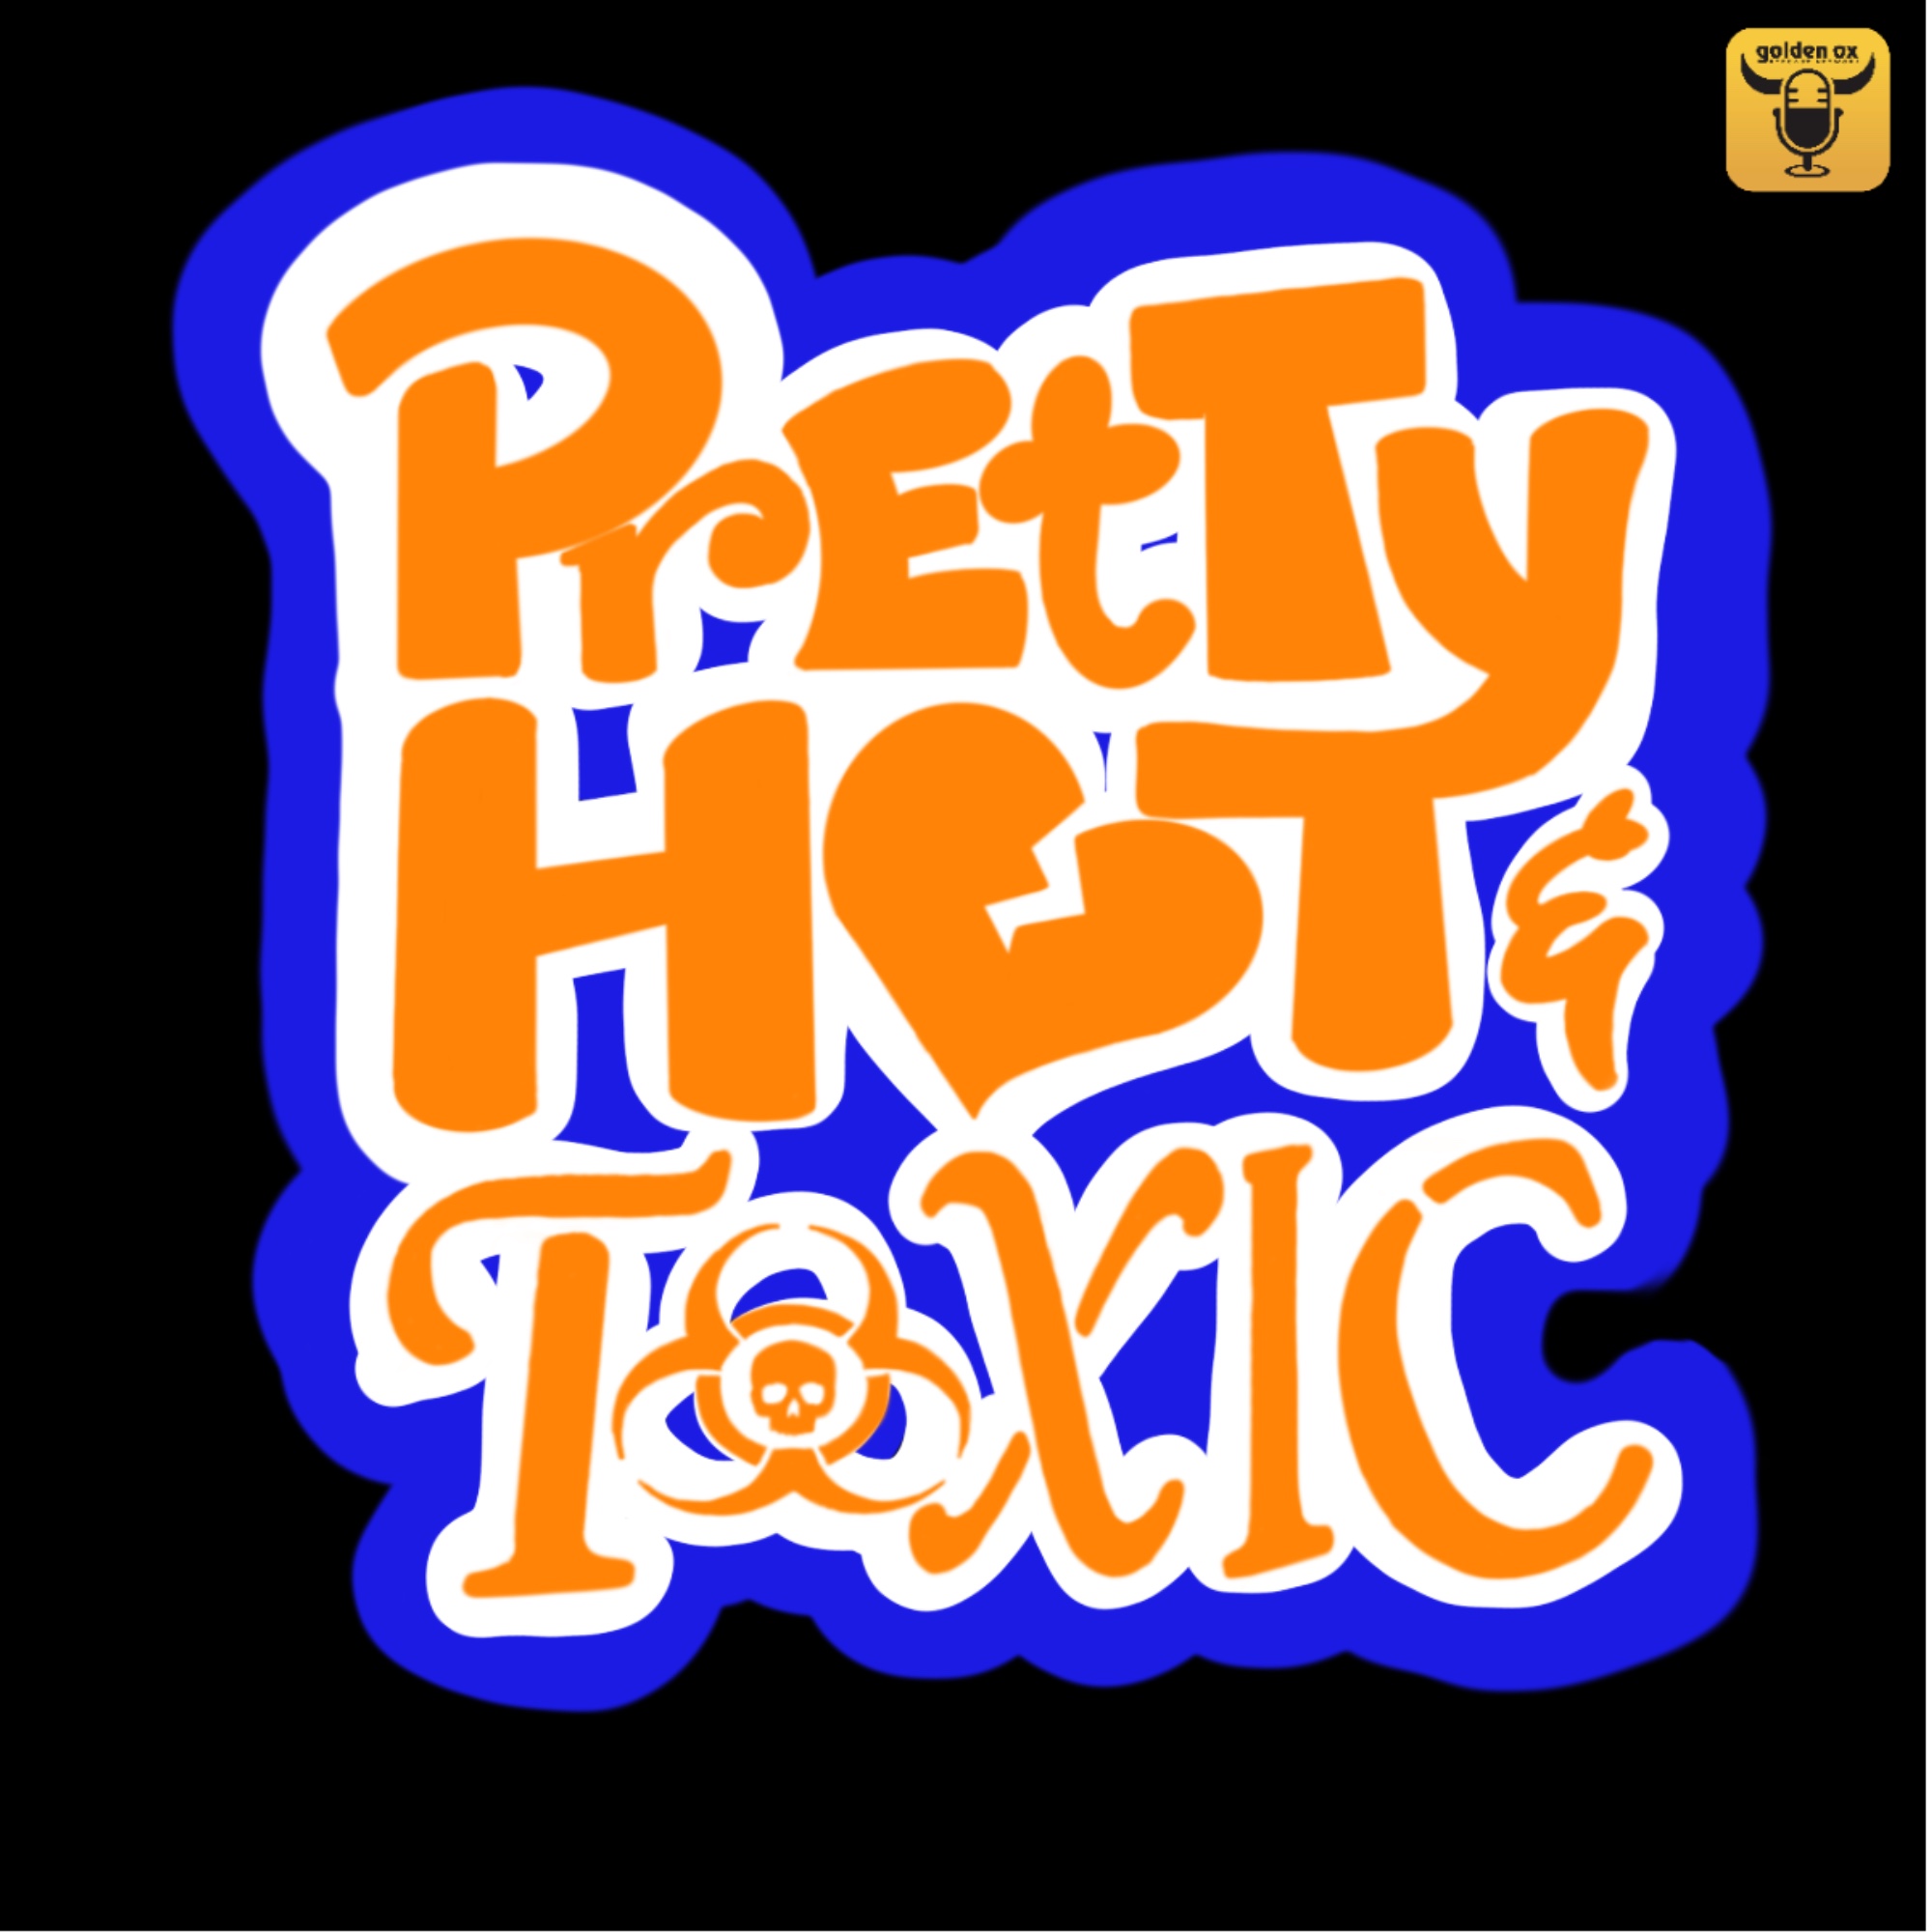 Pretty Hot And Toxic's artwork